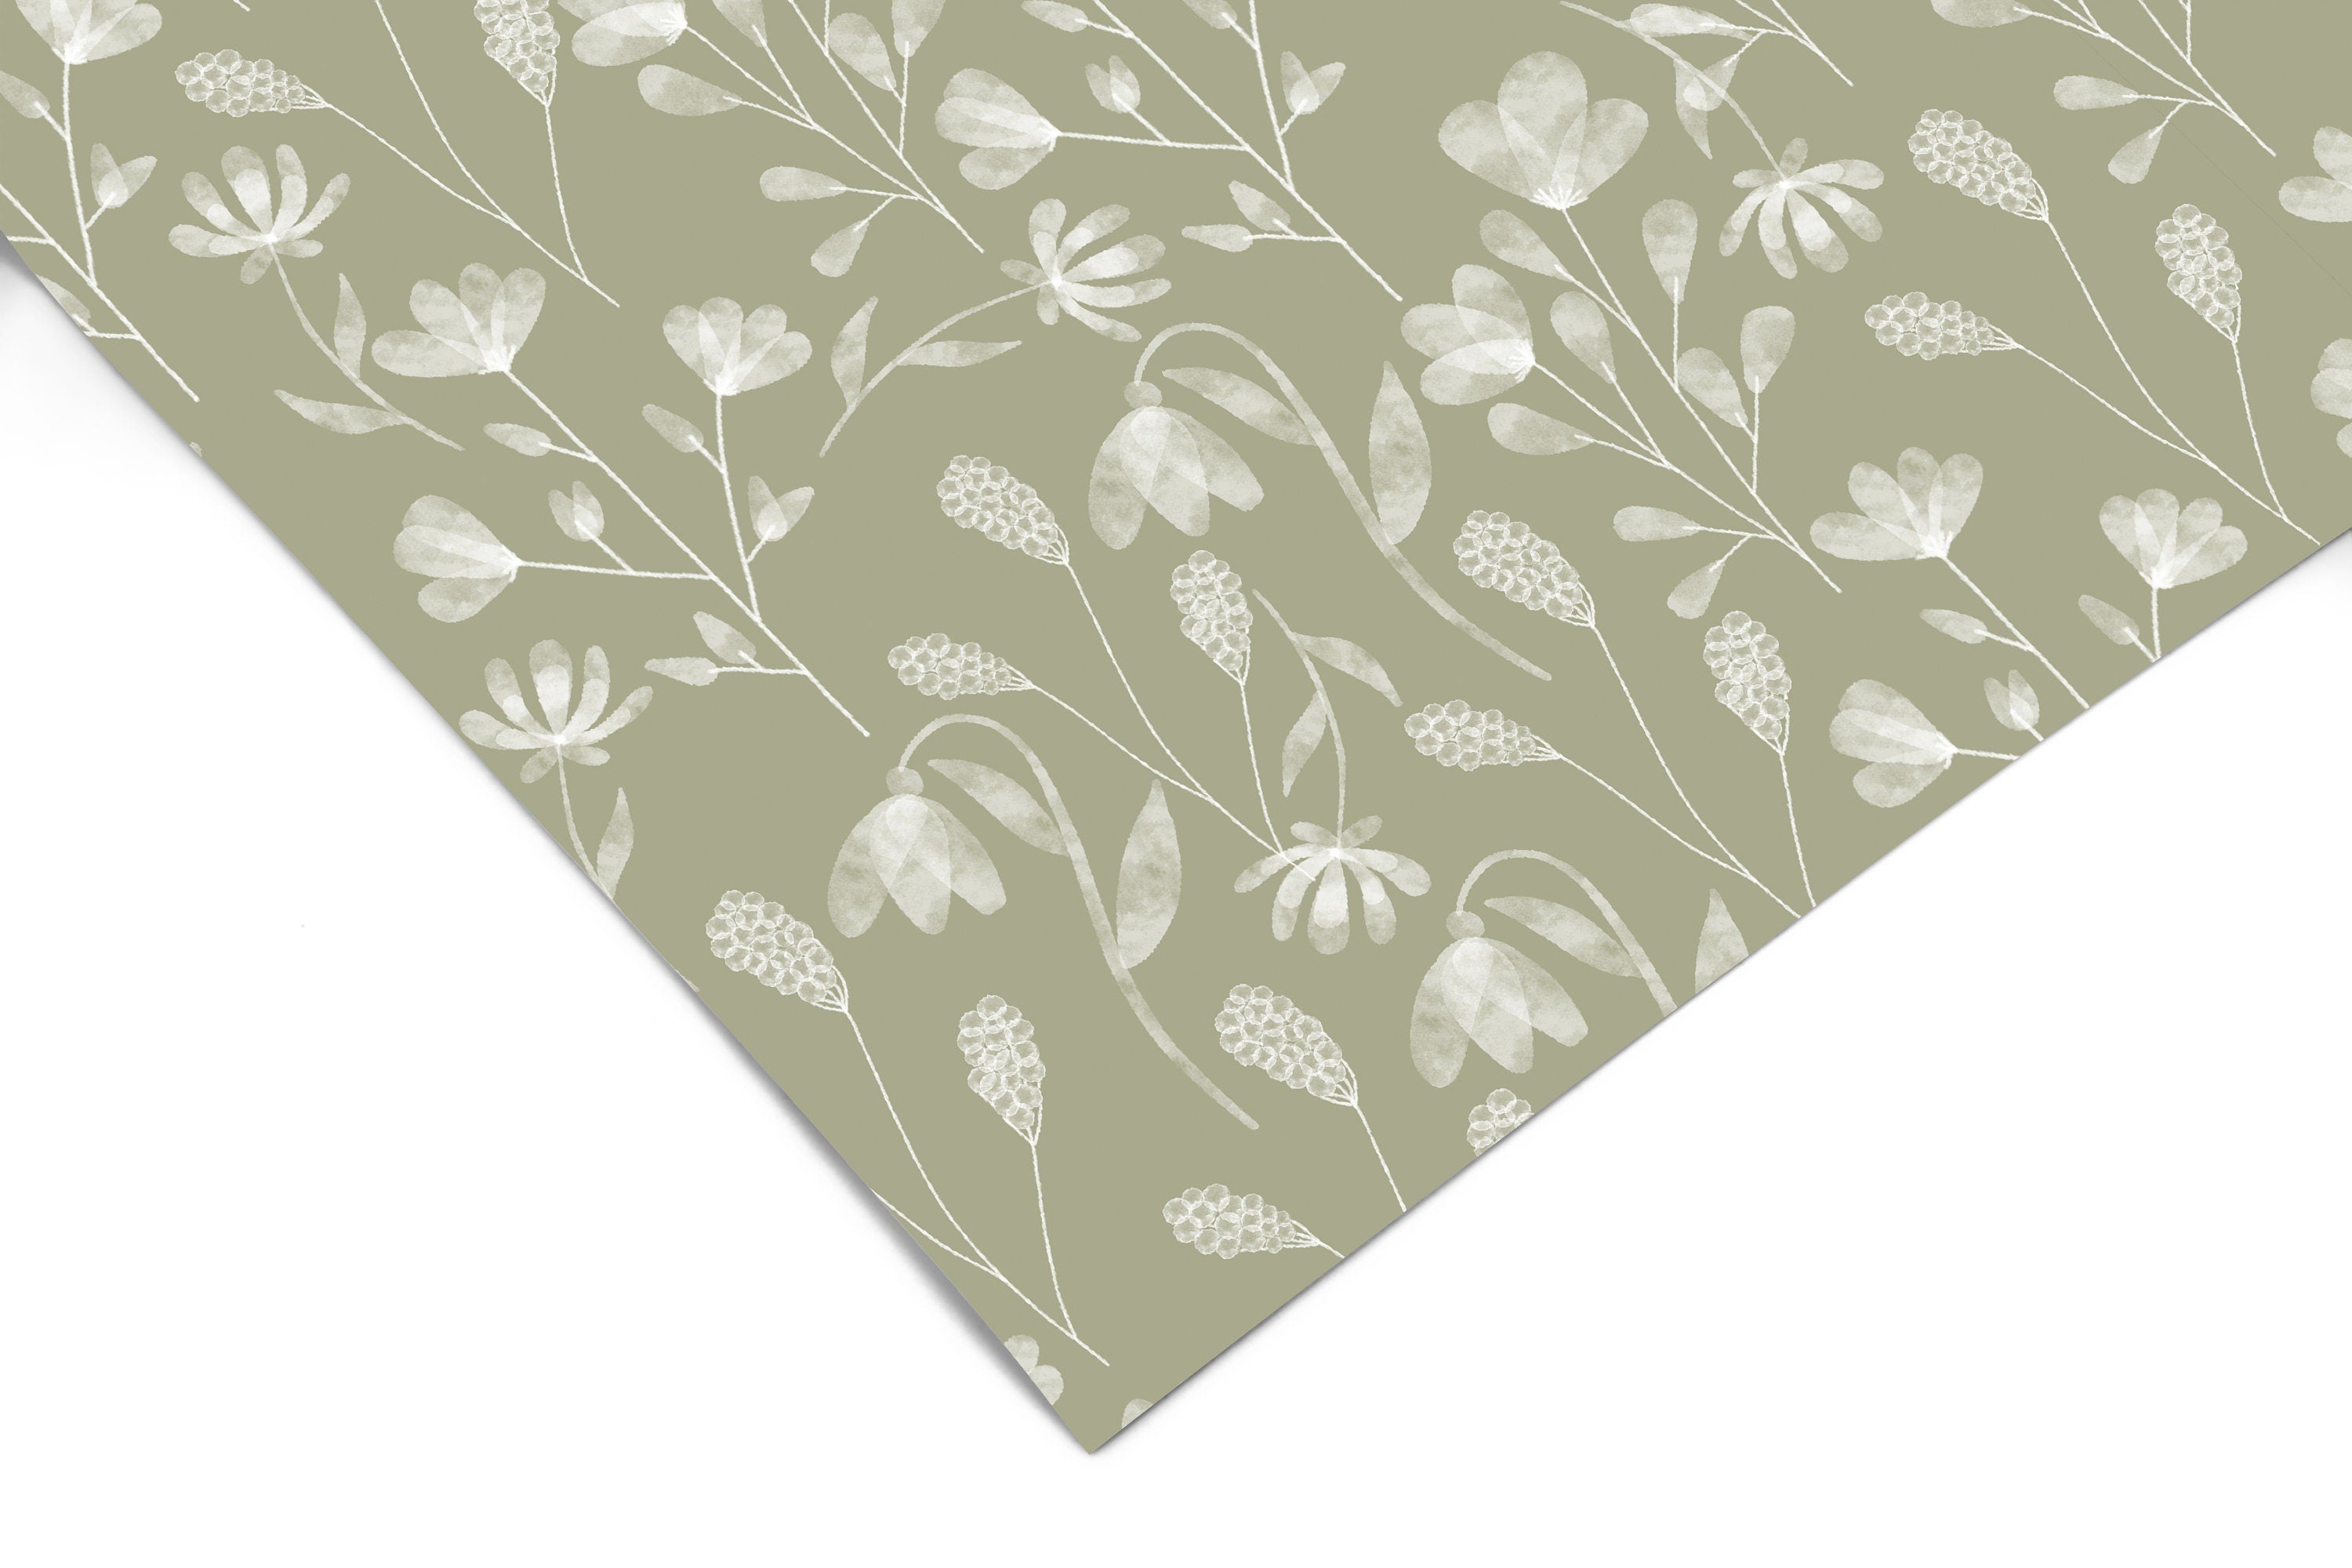 Olive Green Floral Contact Paper Peel And Stick Wallpaper | Removable Wallpaper | Shelf Liner | Drawer Liner | Peel and Stick Paper 1005